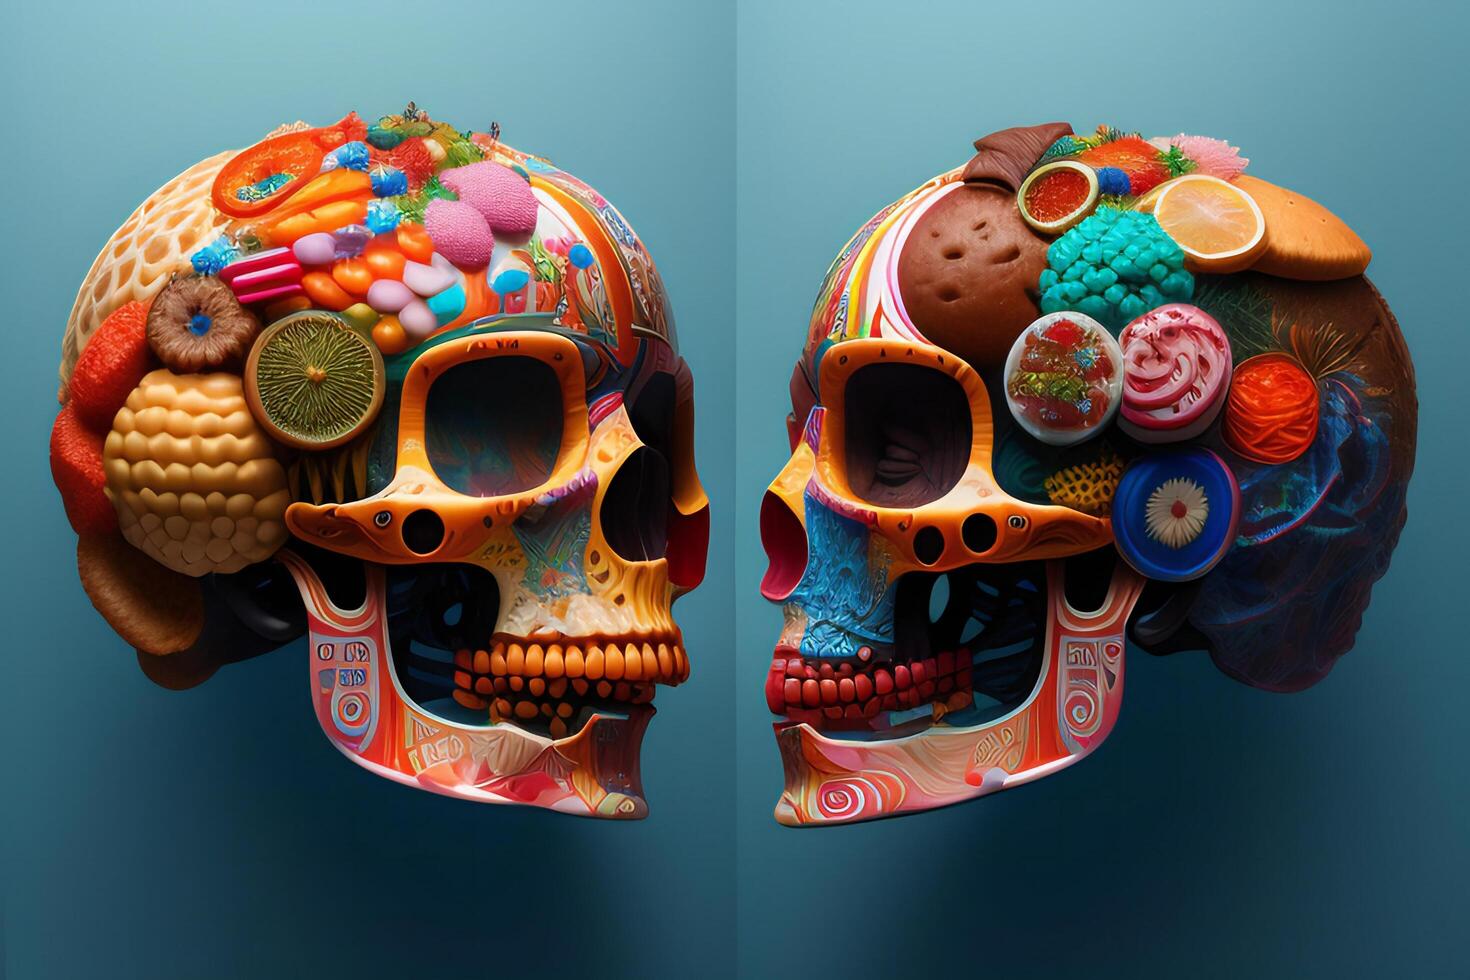 the anatomy of a zoombie head made of junk food. photo